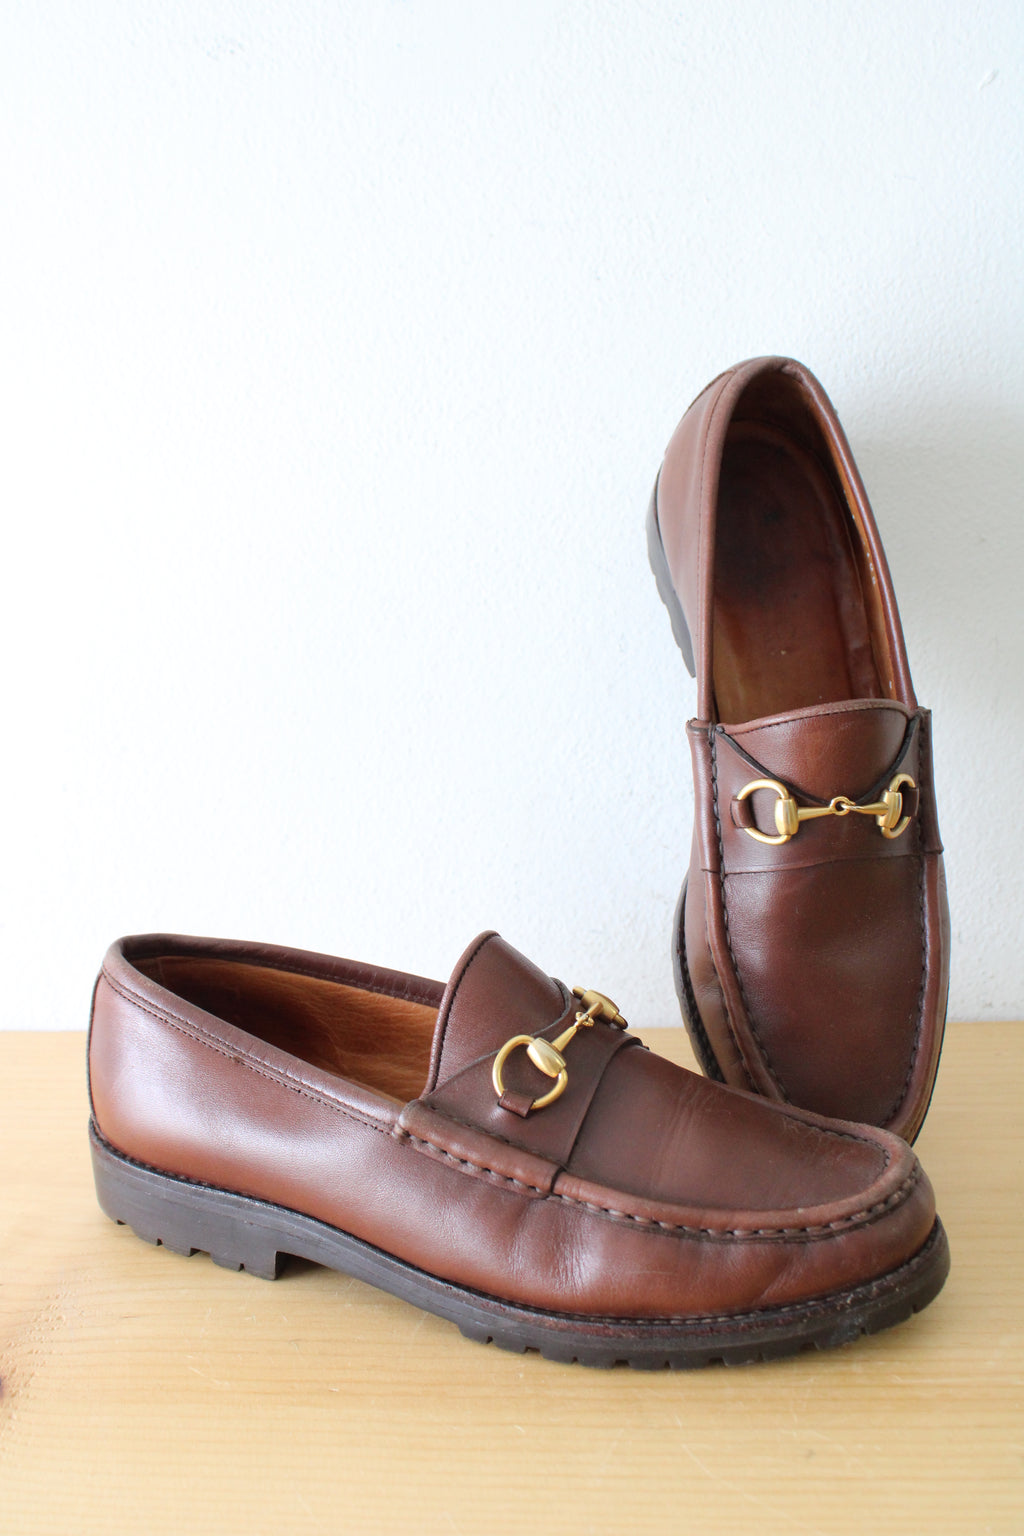 Gucci Vintage Brown Leather Horsebit Loafers | Size 37 (6.5)